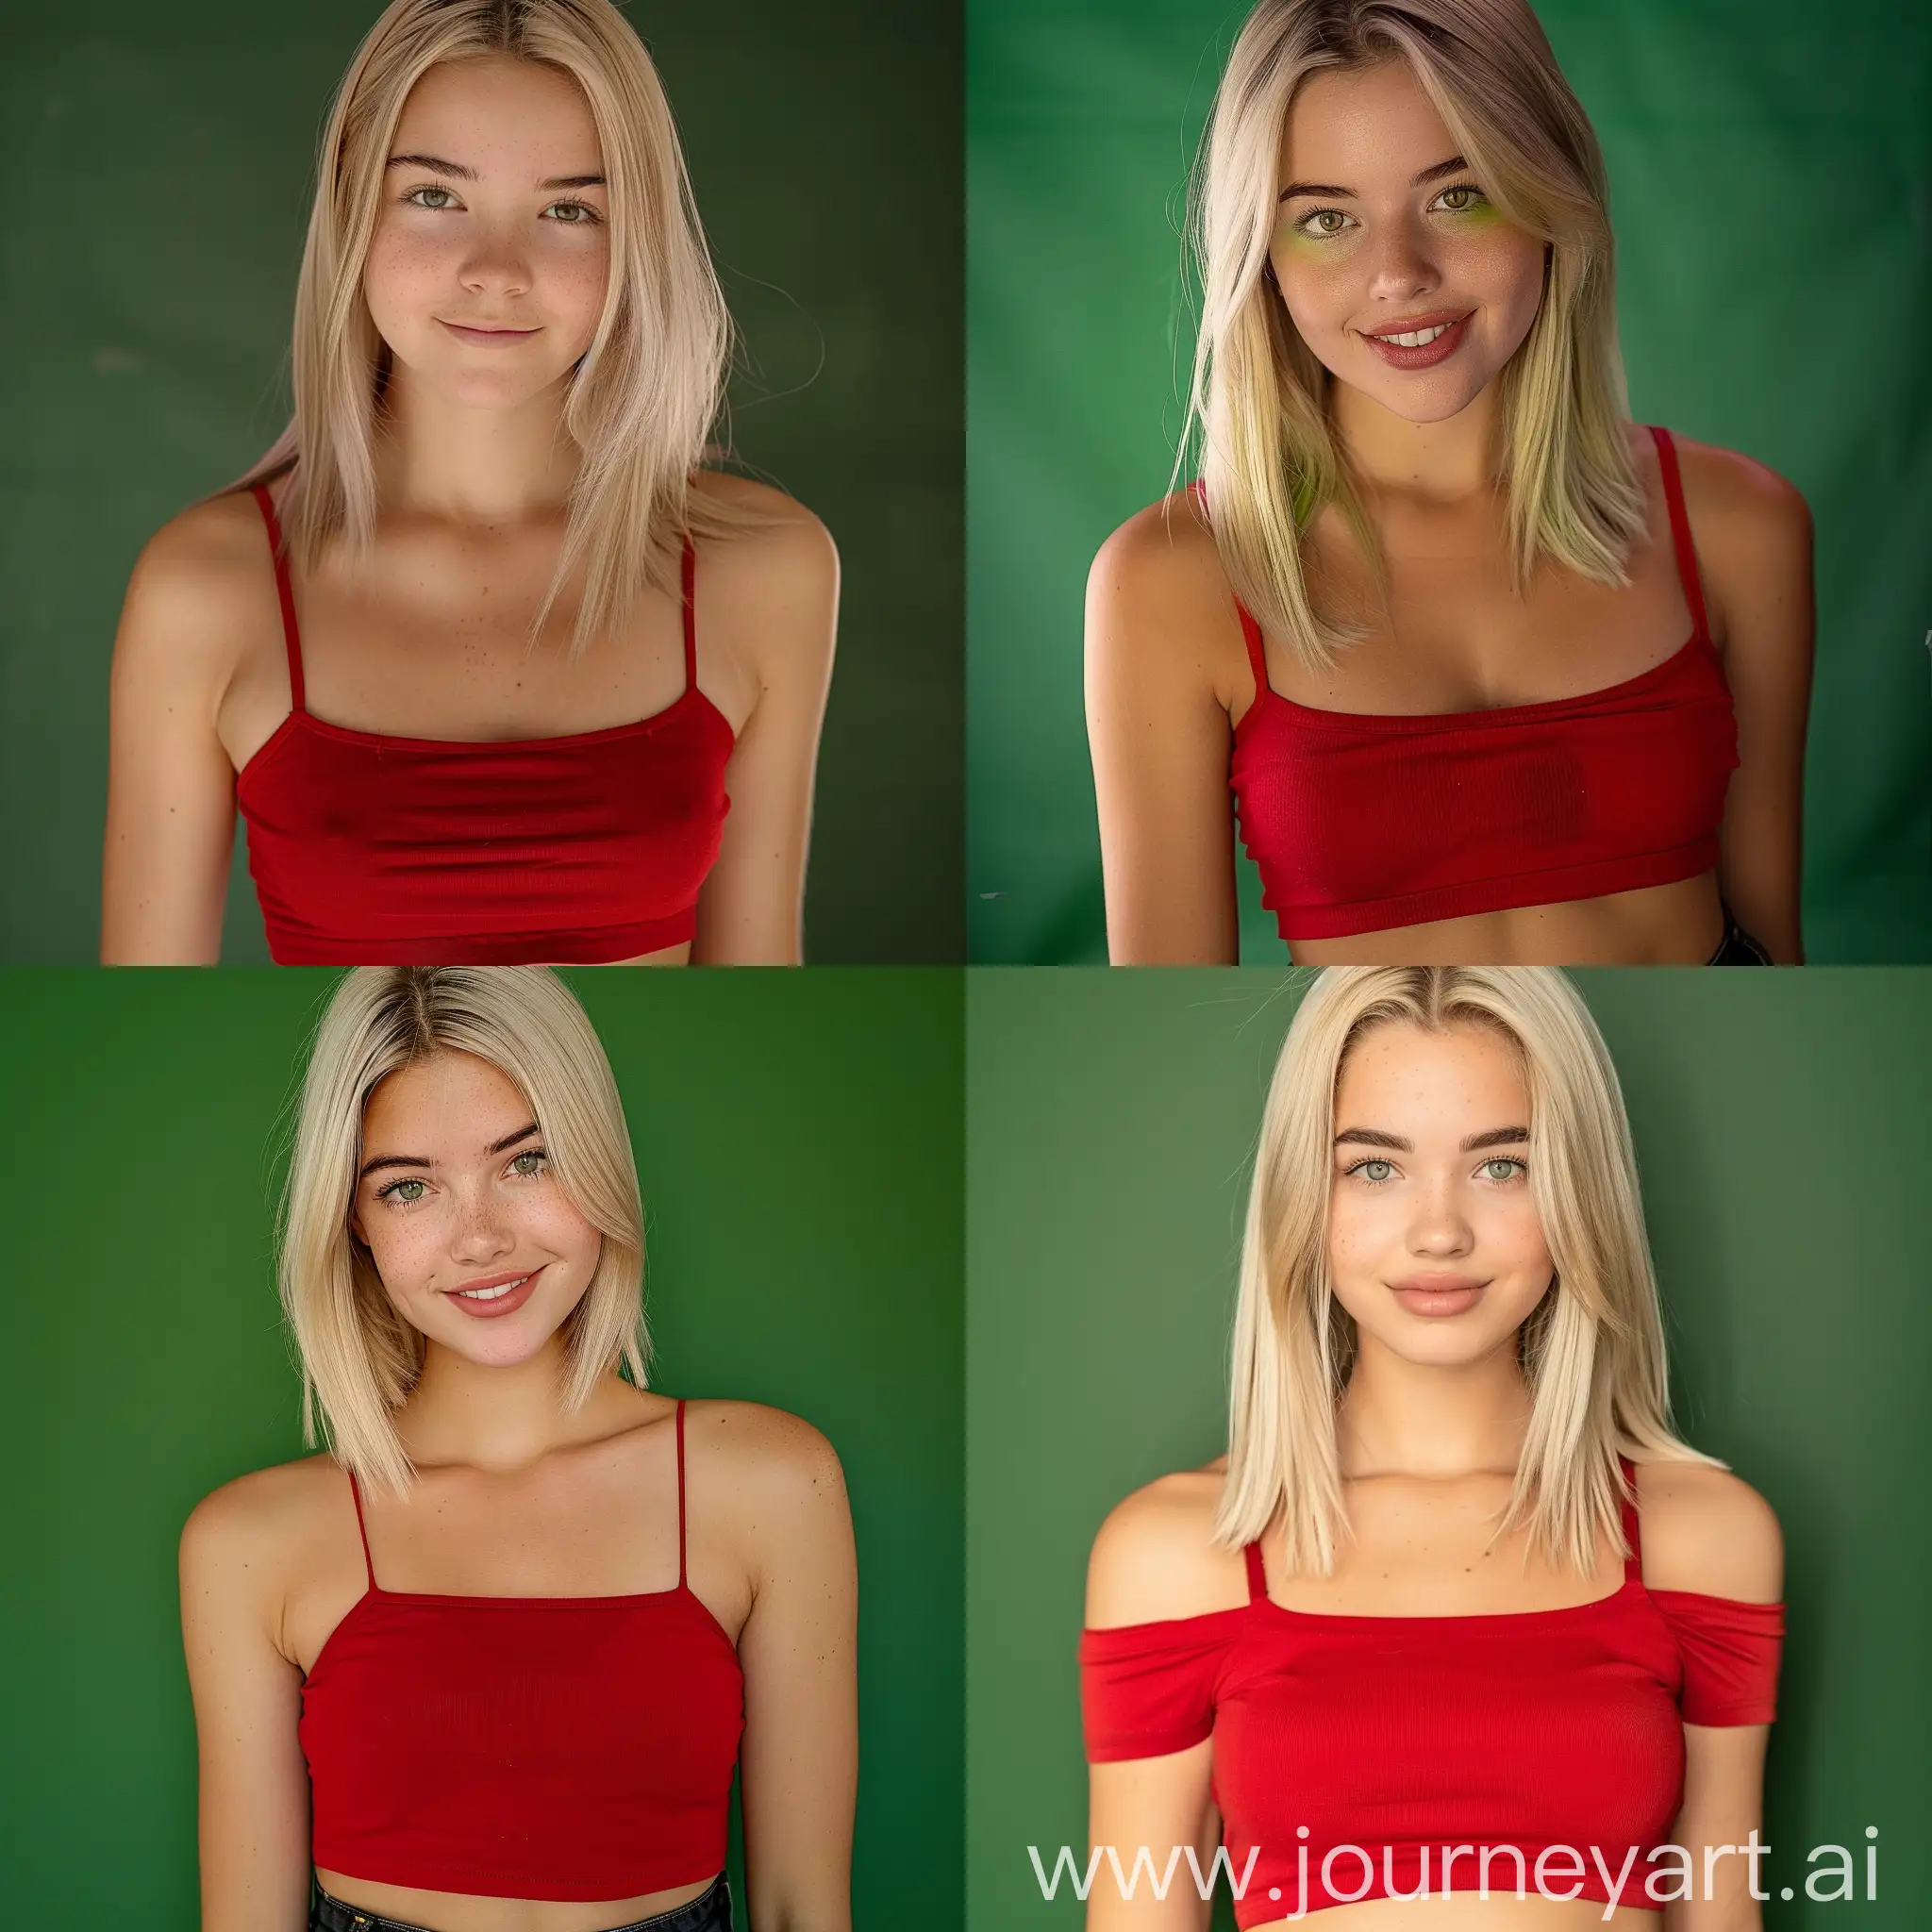 Endearing-Blonde-Woman-with-Vibrant-Eyes-in-Red-Crop-Top